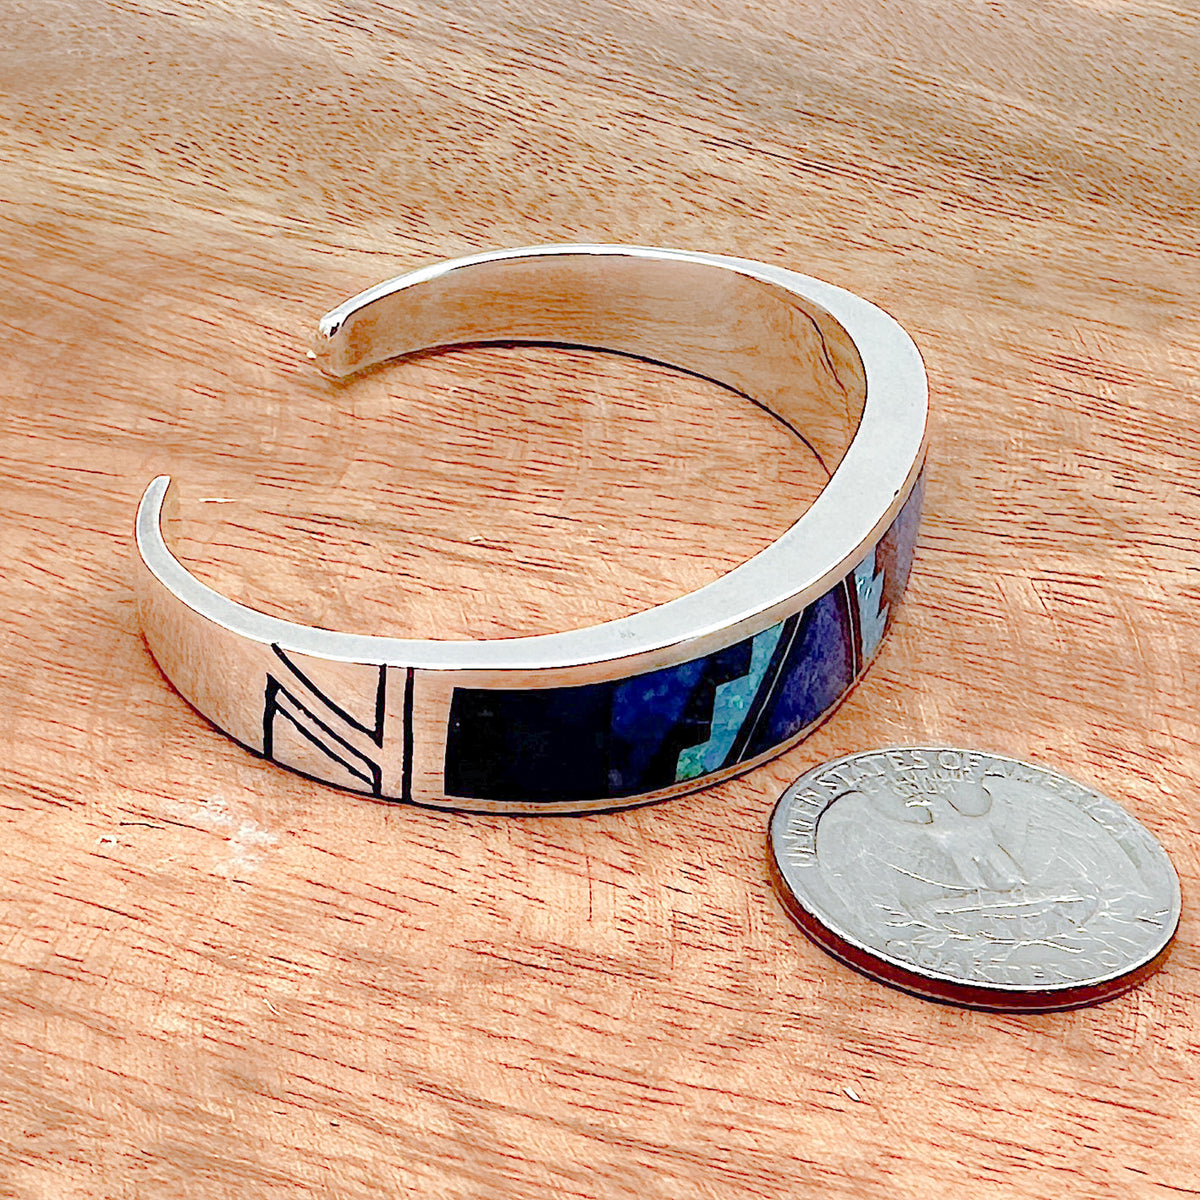 Comparison shot of a US quarter coin and a blue sky inlay cuff bracelet as viewed from the side